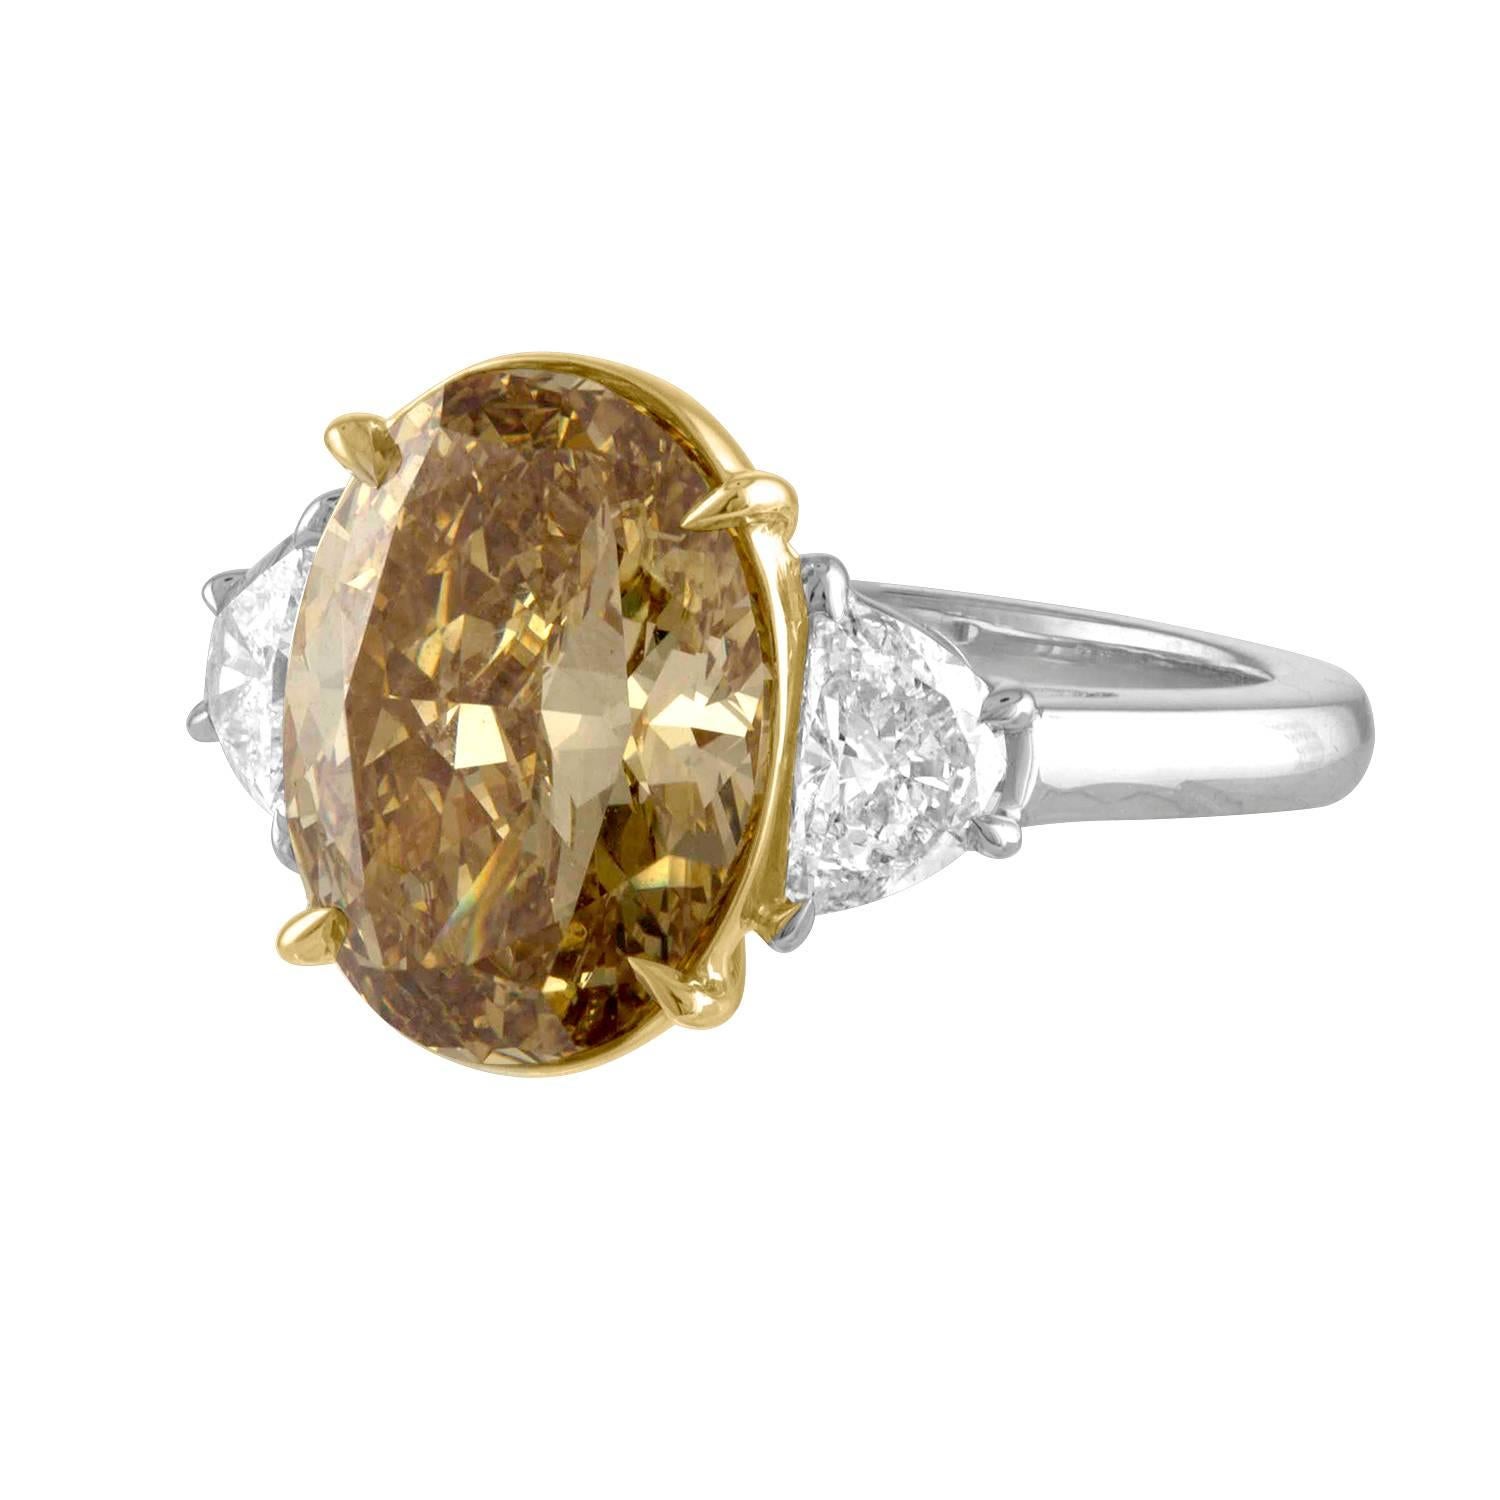 Brilliant 5.05 Carat GIA Oval Diamond Fancy Deep Brownish Yellow VS1 is set in Two Tone Mounting. 18 Karat Yellow Gold with Platinum.
On the Two Sides there are Two Half Moons 0.84 Carat Total Weights.
The GIA Certificate number is 2185708269.